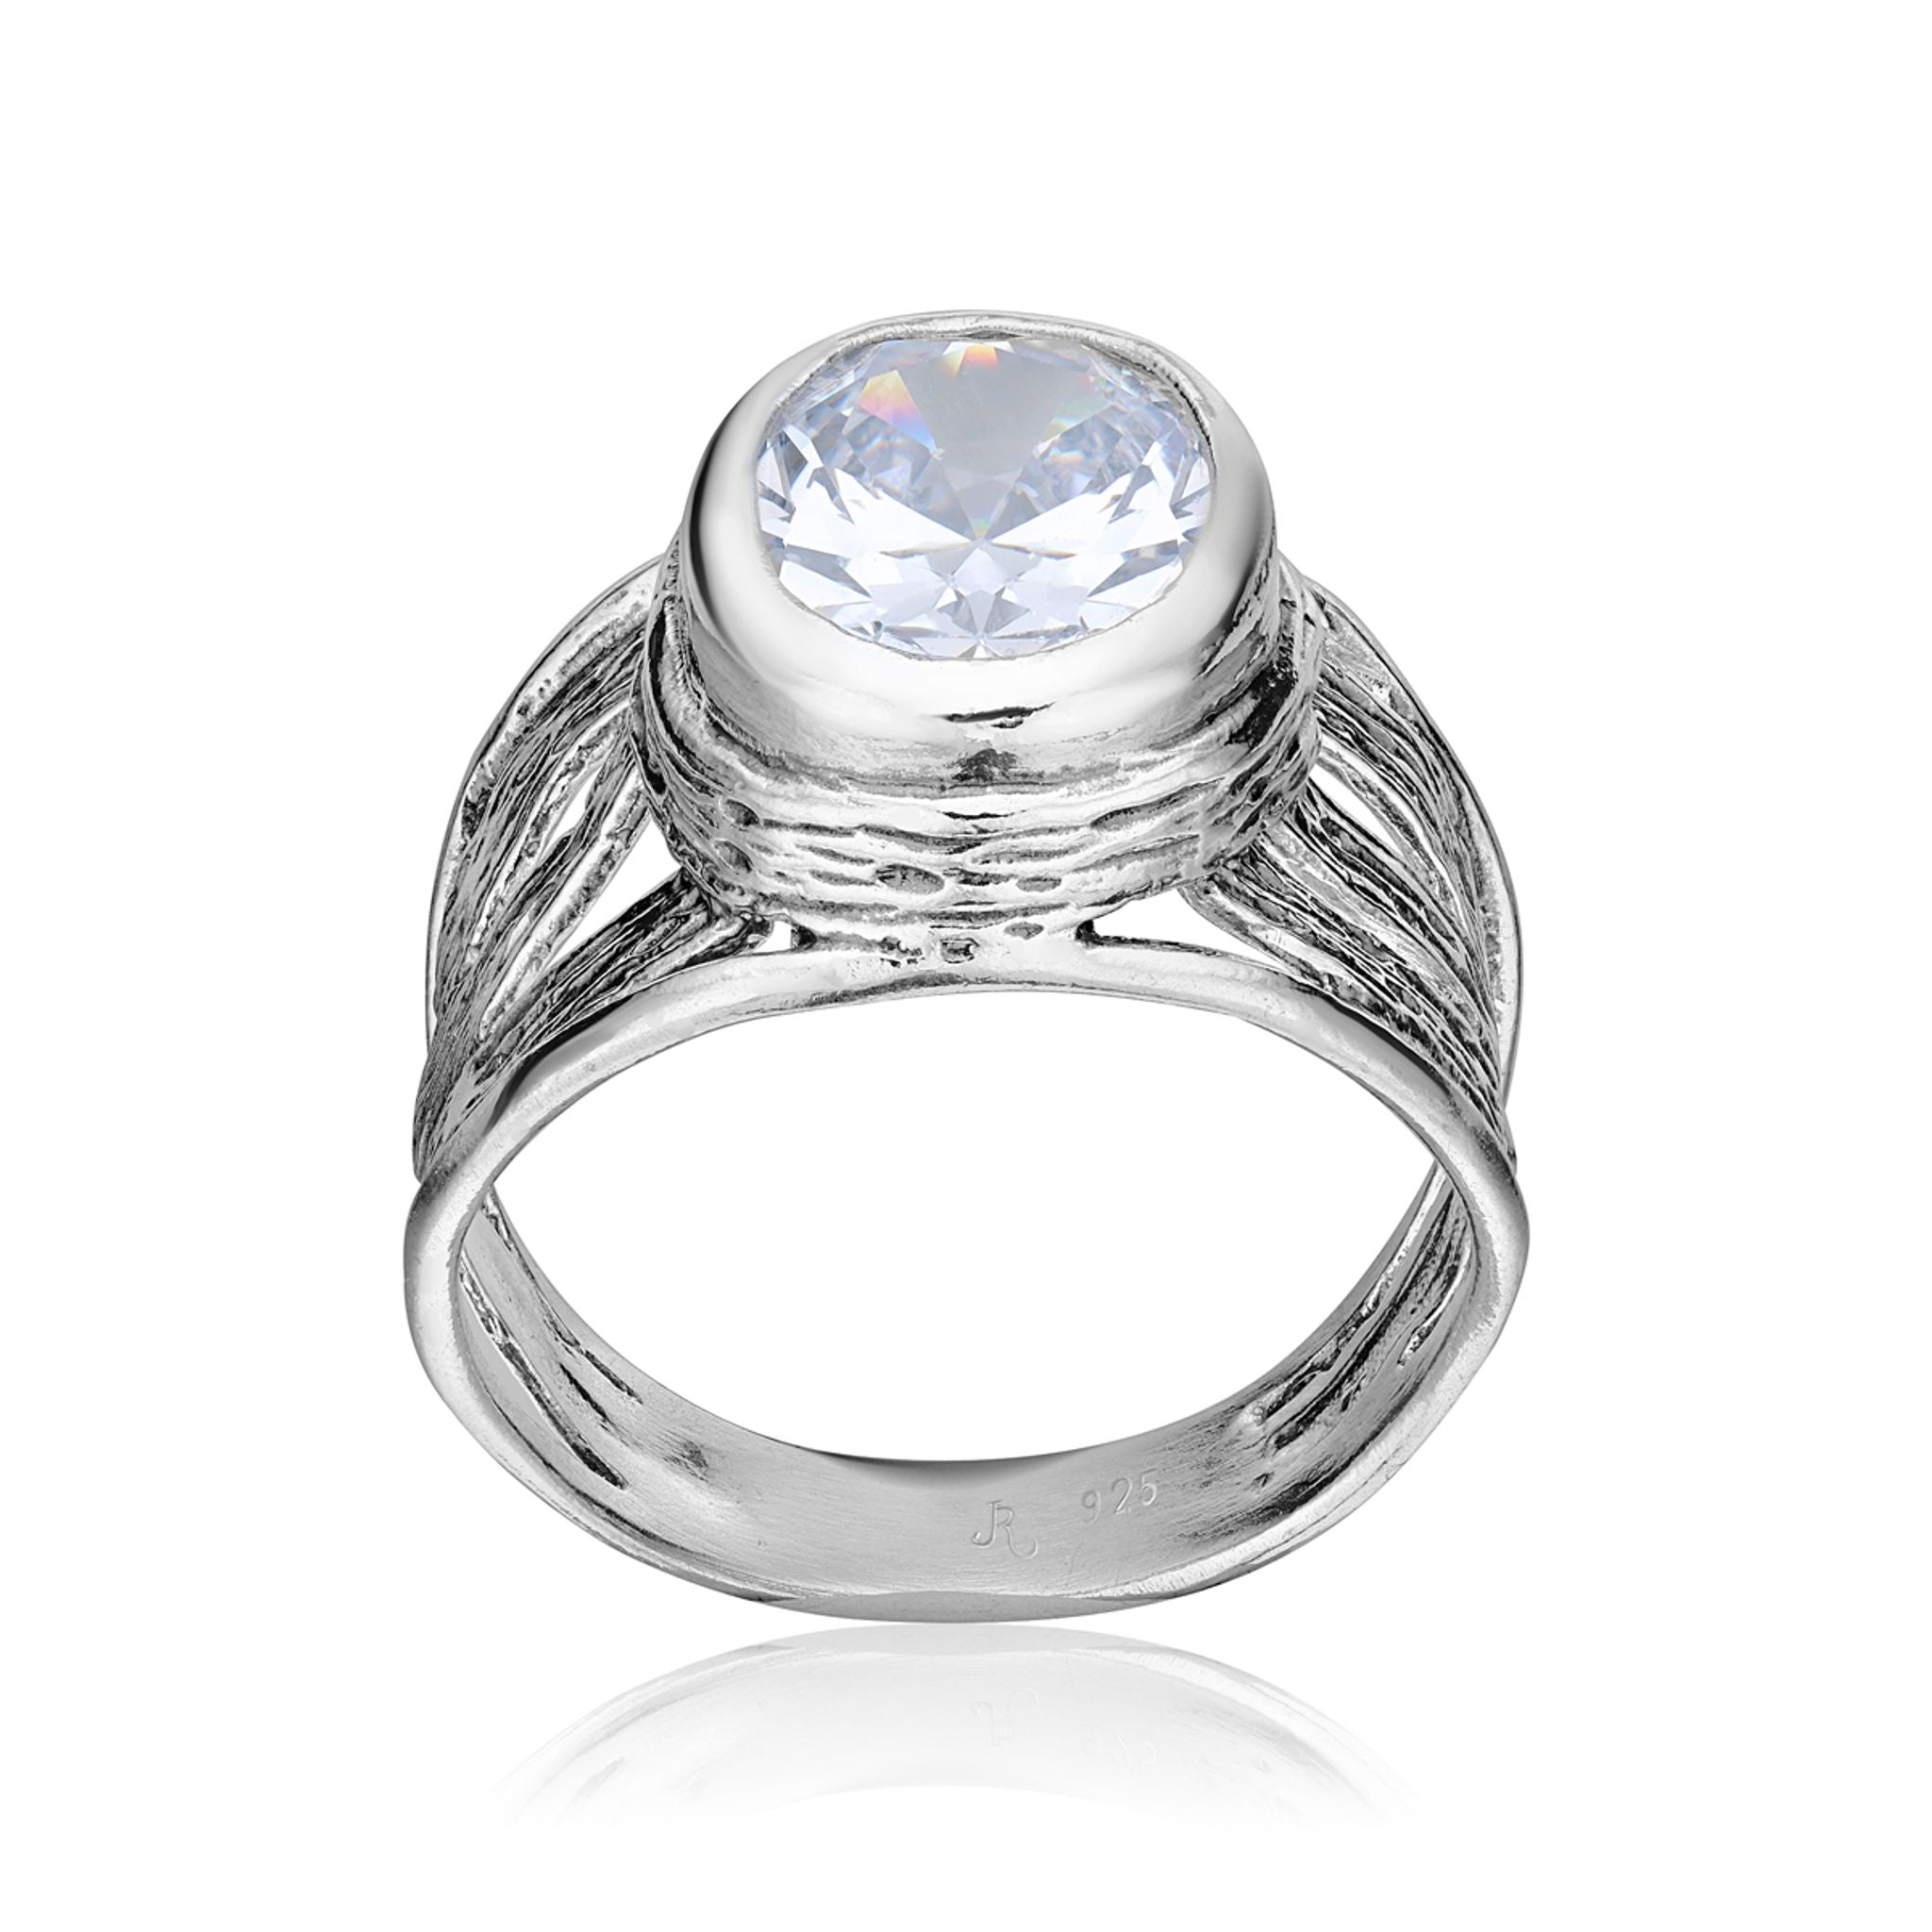 Wide Sterling Silver CZ Ring